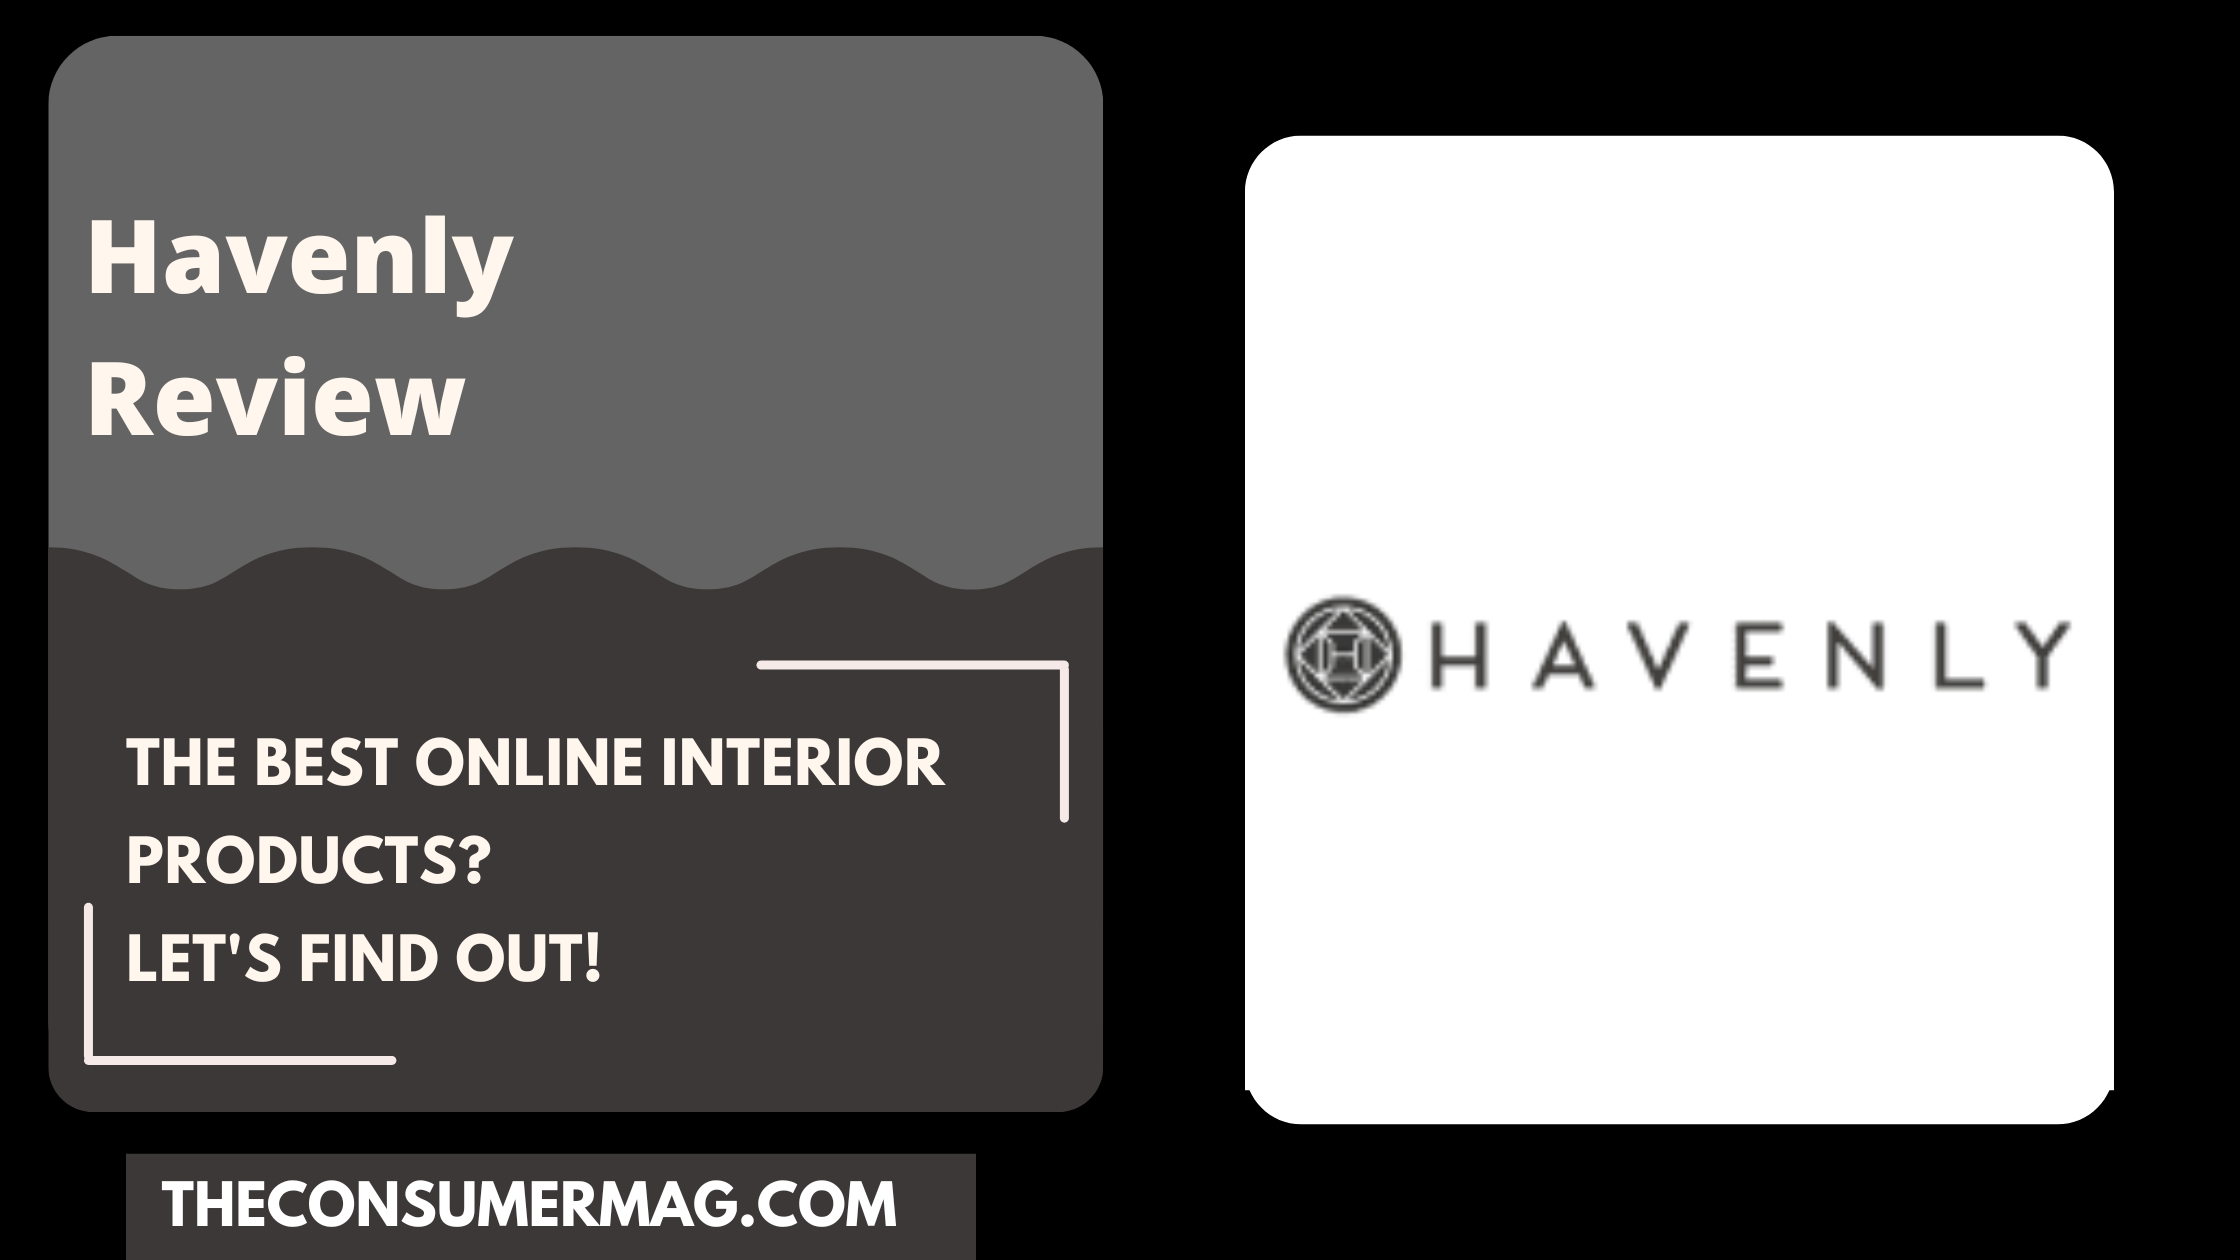 Havenly featured image